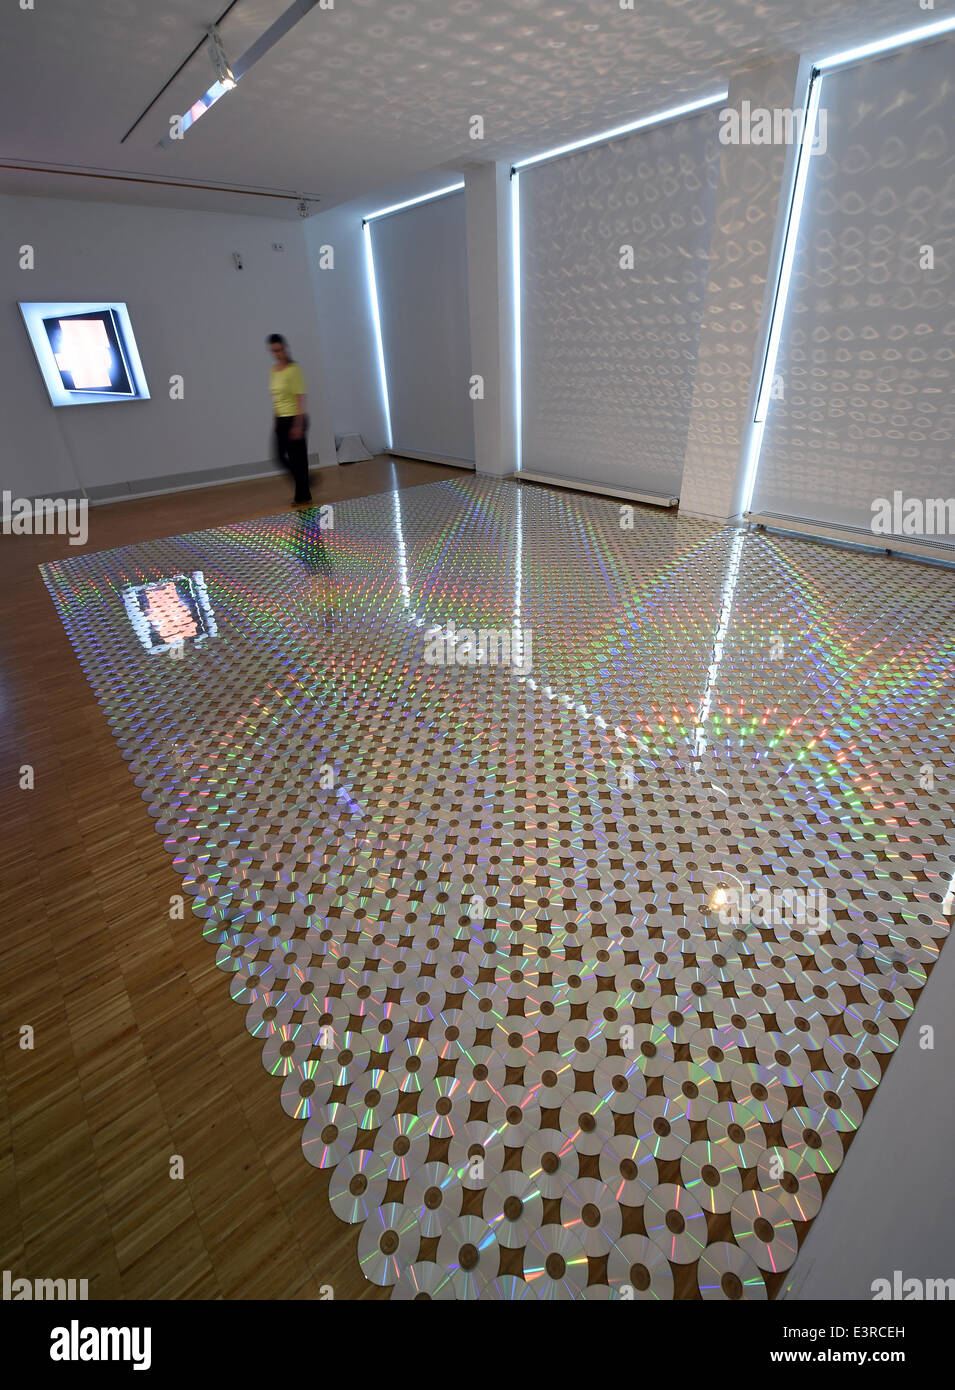 Celle, Germany. 27th June, 2014. The istallation 'spectra dat' by the German artist Detlef Schweiger is a part of the light art exhibition 'Scheinwerfer' (lit.: 'headlights') in the light art museum in Celle, Germany, 27 June 2014. 36 artists illuminate different light art pieces in the museum and in the city until 05 October 2014. Photo: Holger Hollemann/dpa/Alamy Live News Stock Photo